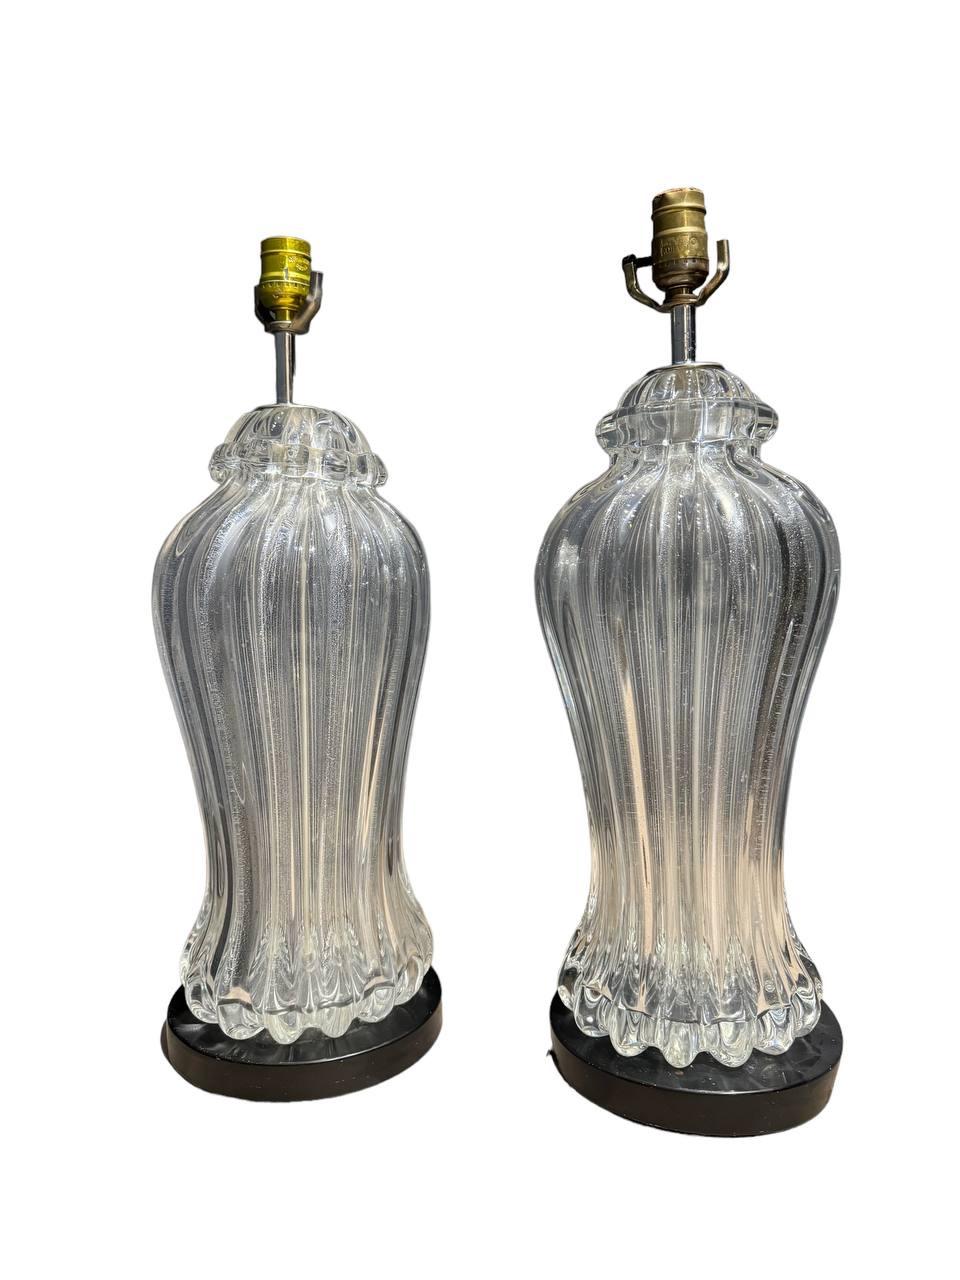 A pair of circa 1930’s hand blown Murano glass table lamps